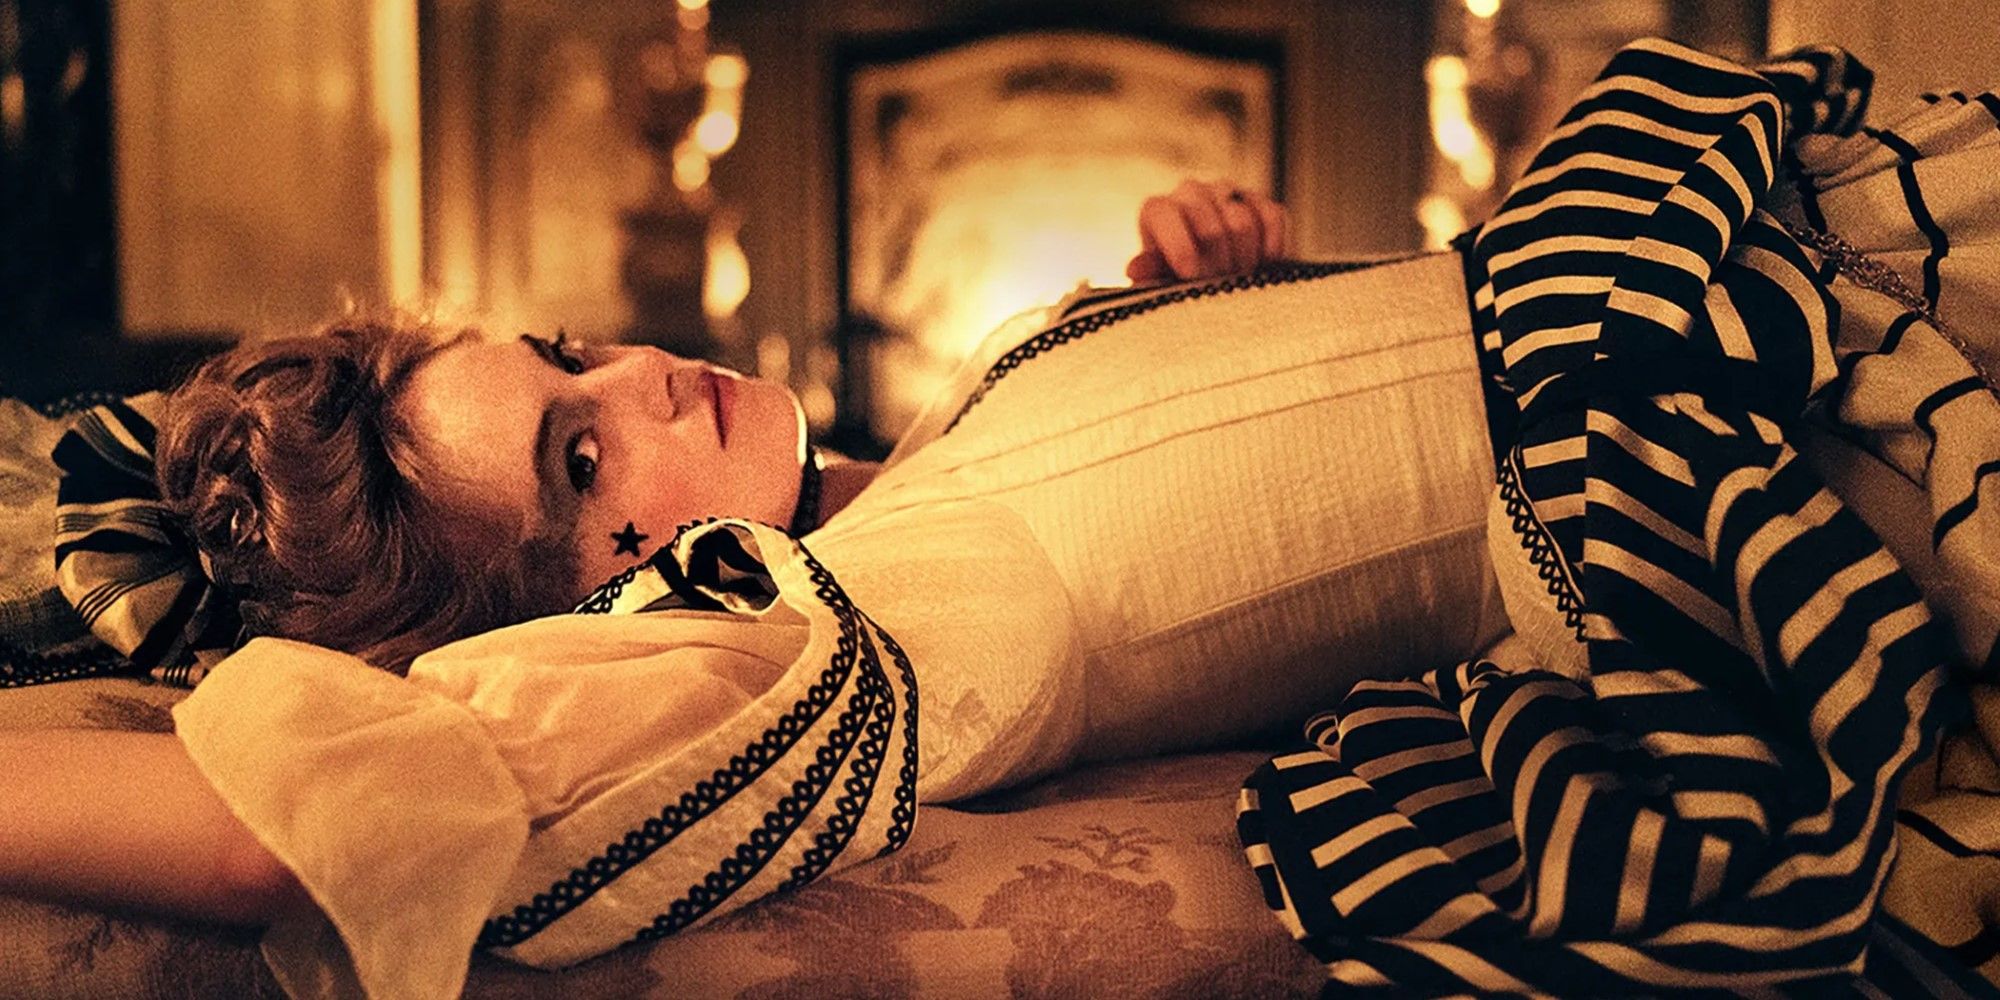 Emma Stone as Abigail Masham, lying in front of a fireplace and smiling slightly in The Favourite